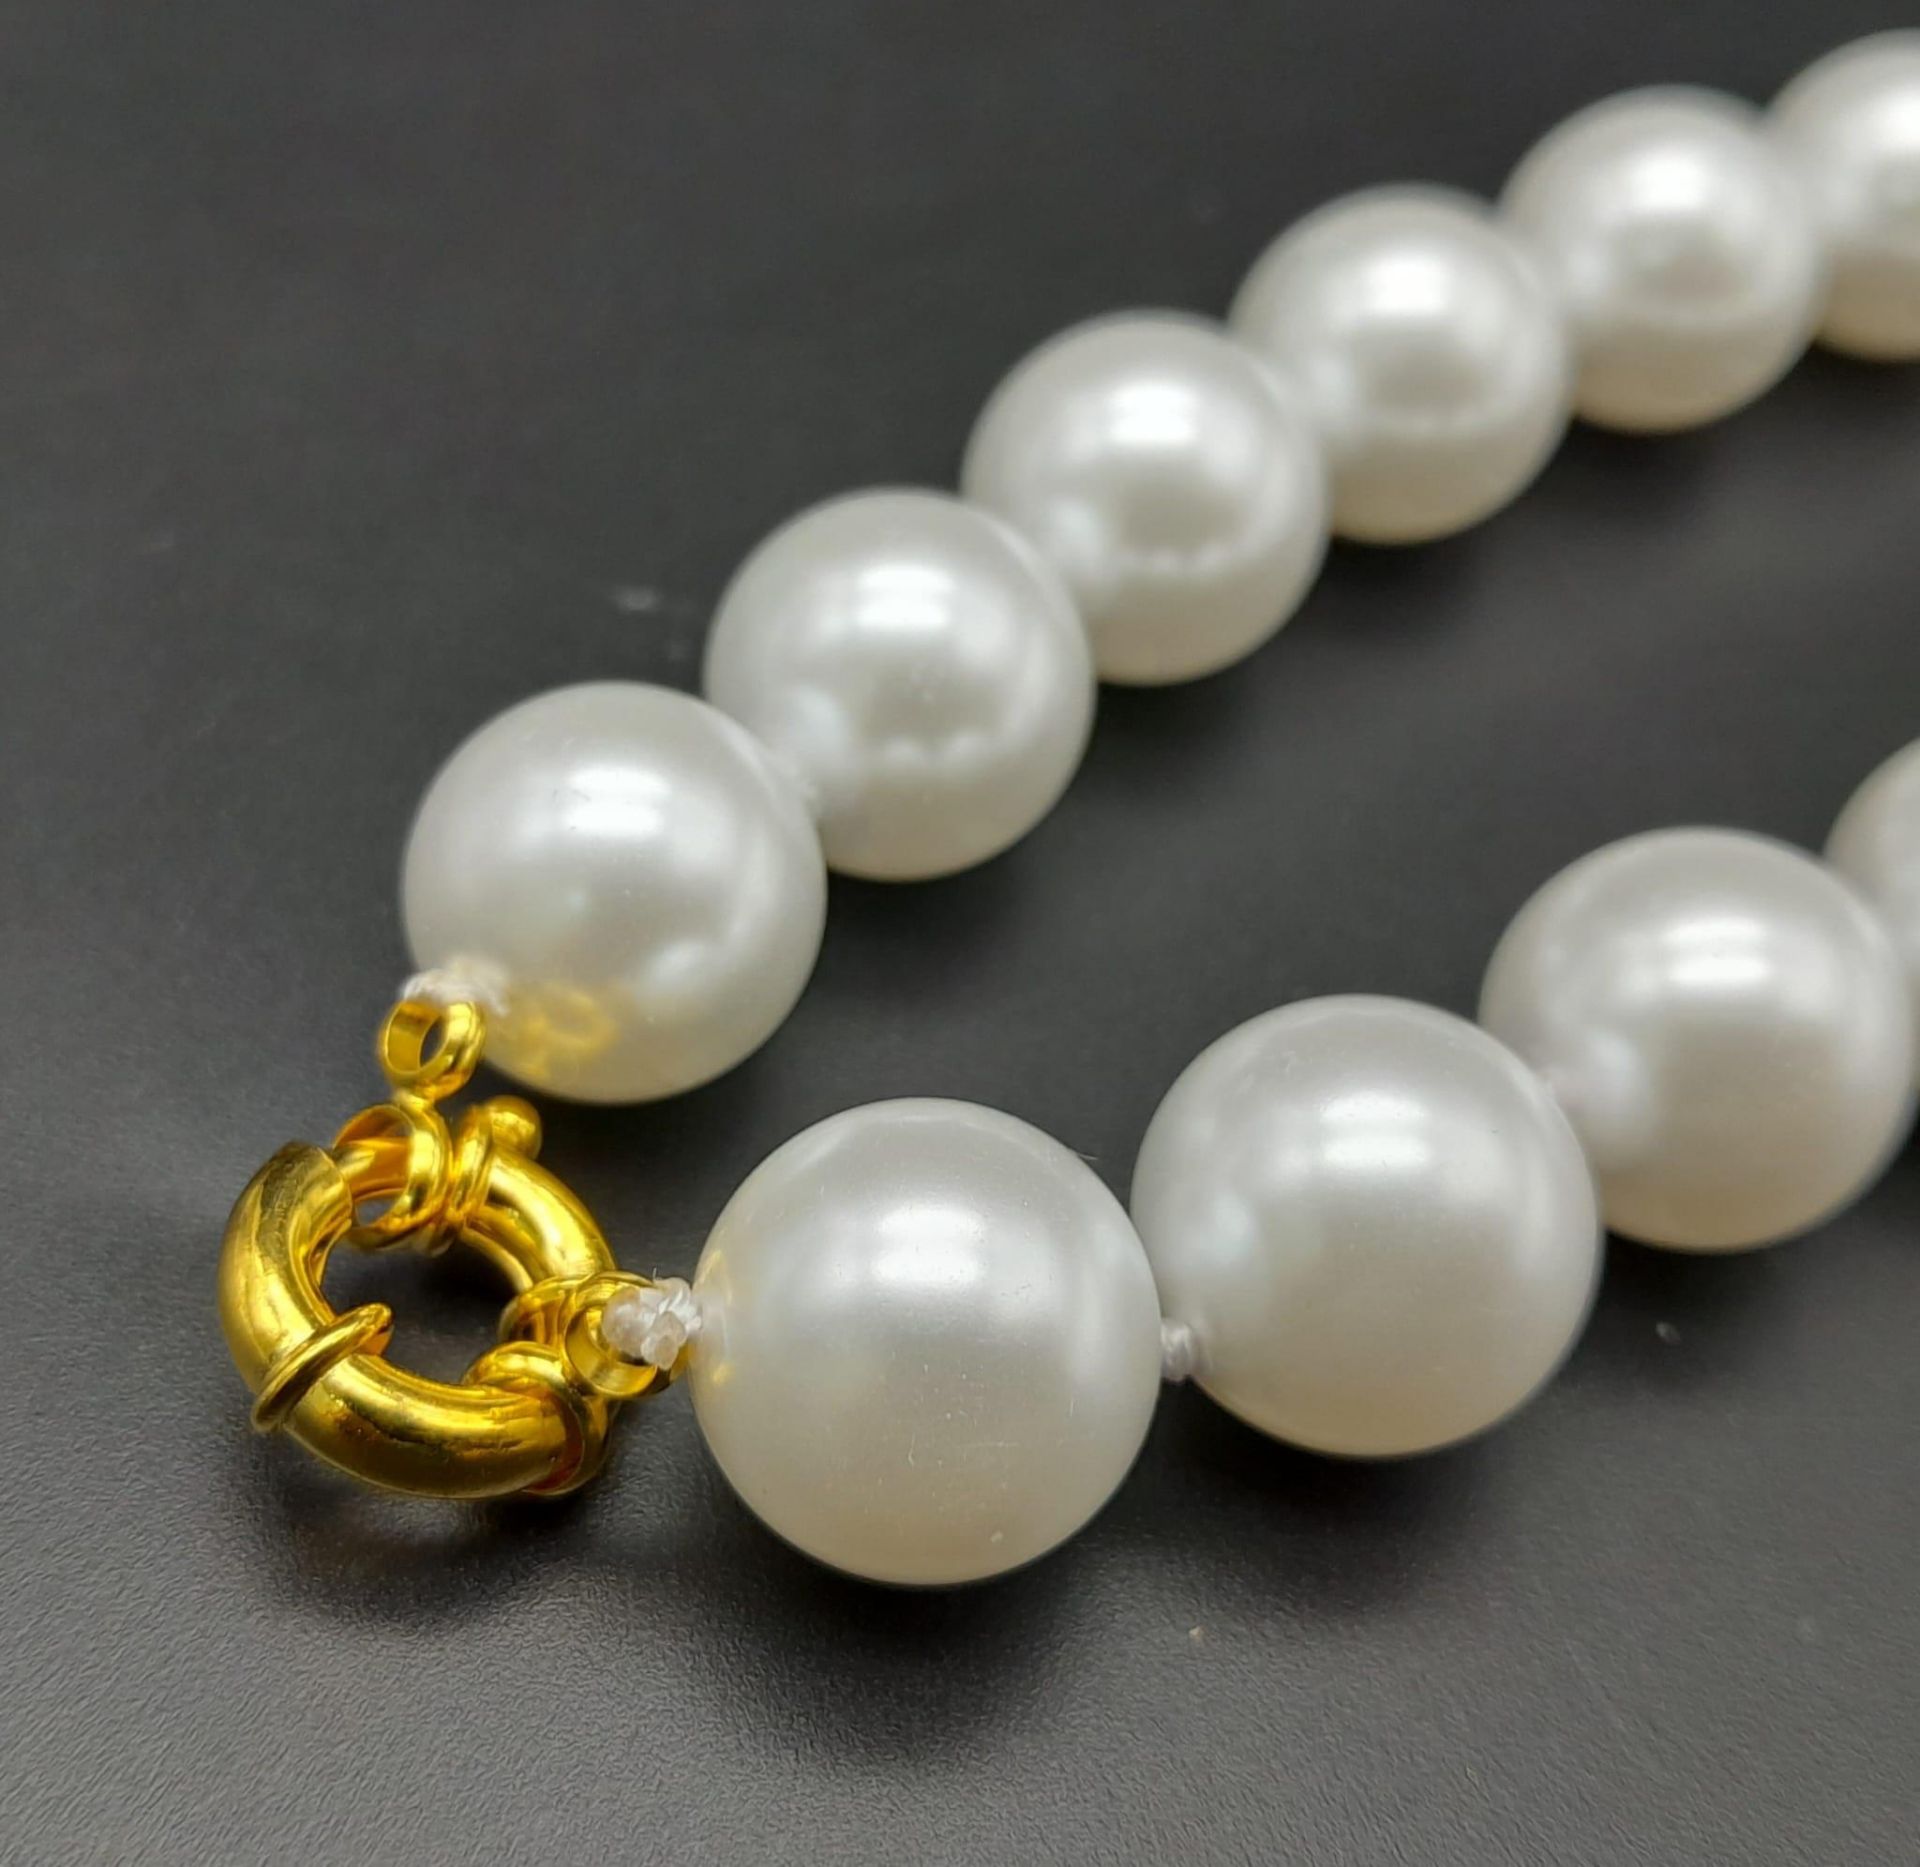 A Lovely Bright White South Sea Pearl Shell Bead Necklace. 14mm beads. 42cm necklace length. - Bild 5 aus 5